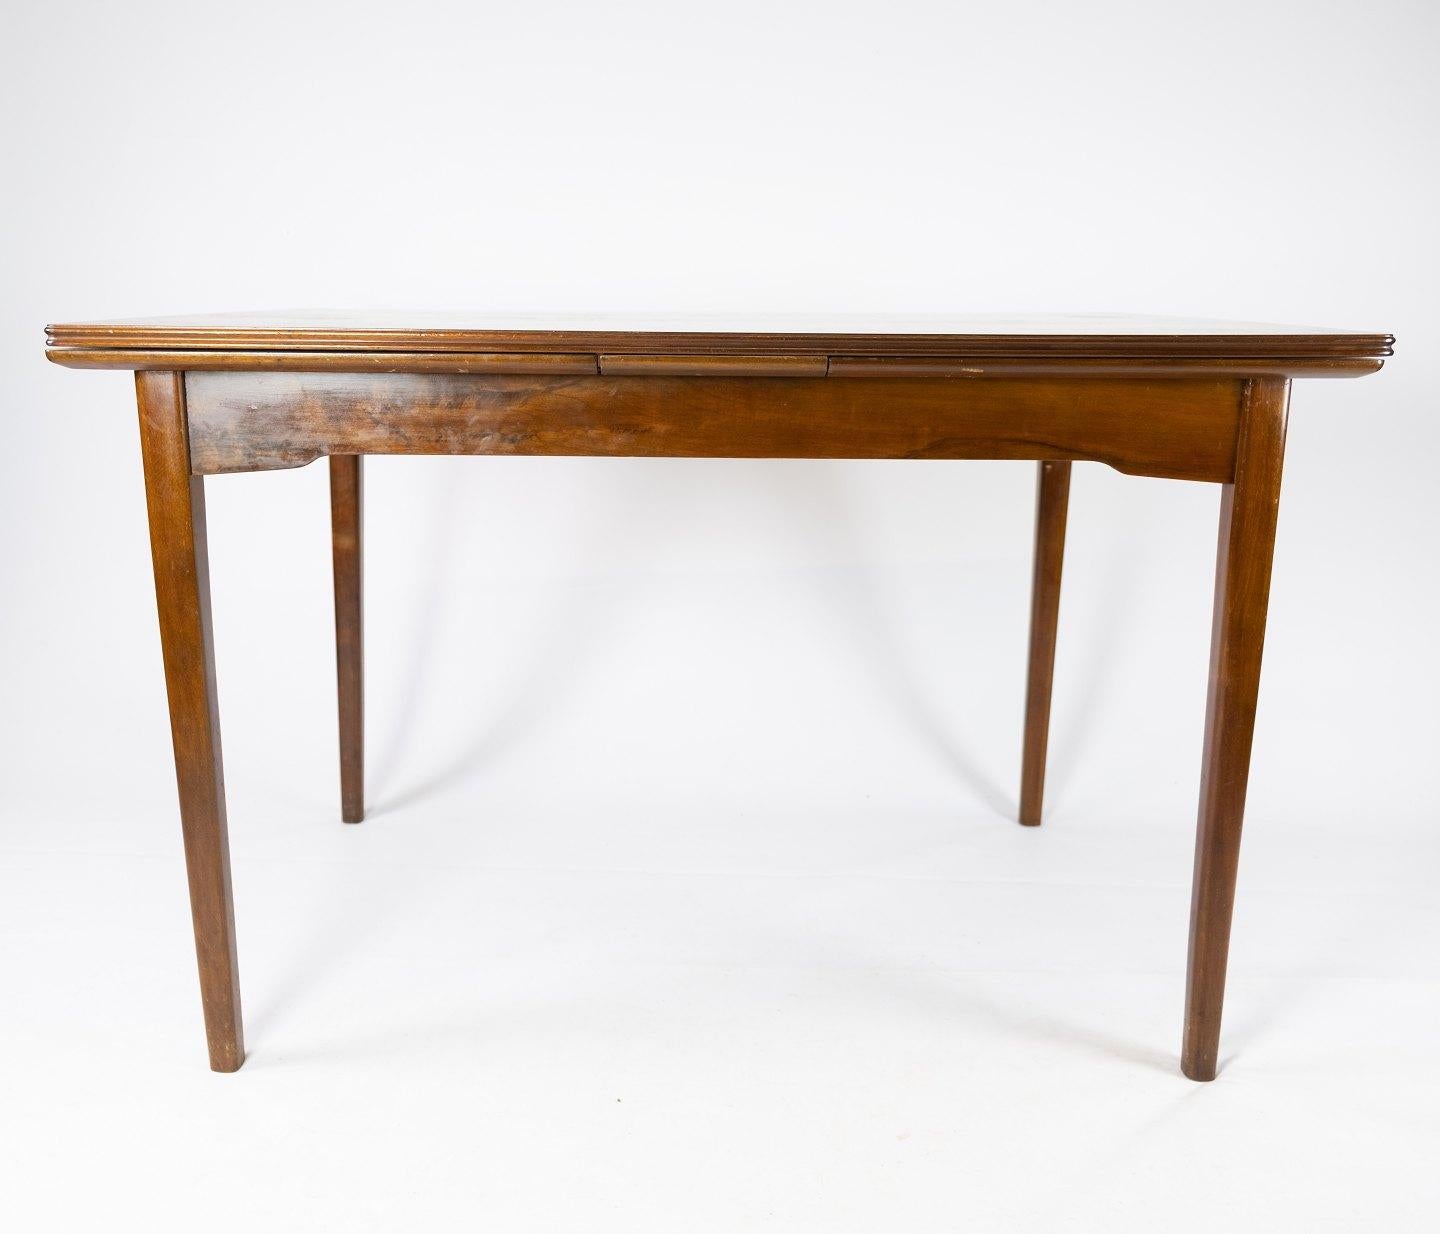 Dining Table Made In Walnut With Extension, Danish Design From 1960s In Good Condition For Sale In Lejre, DK